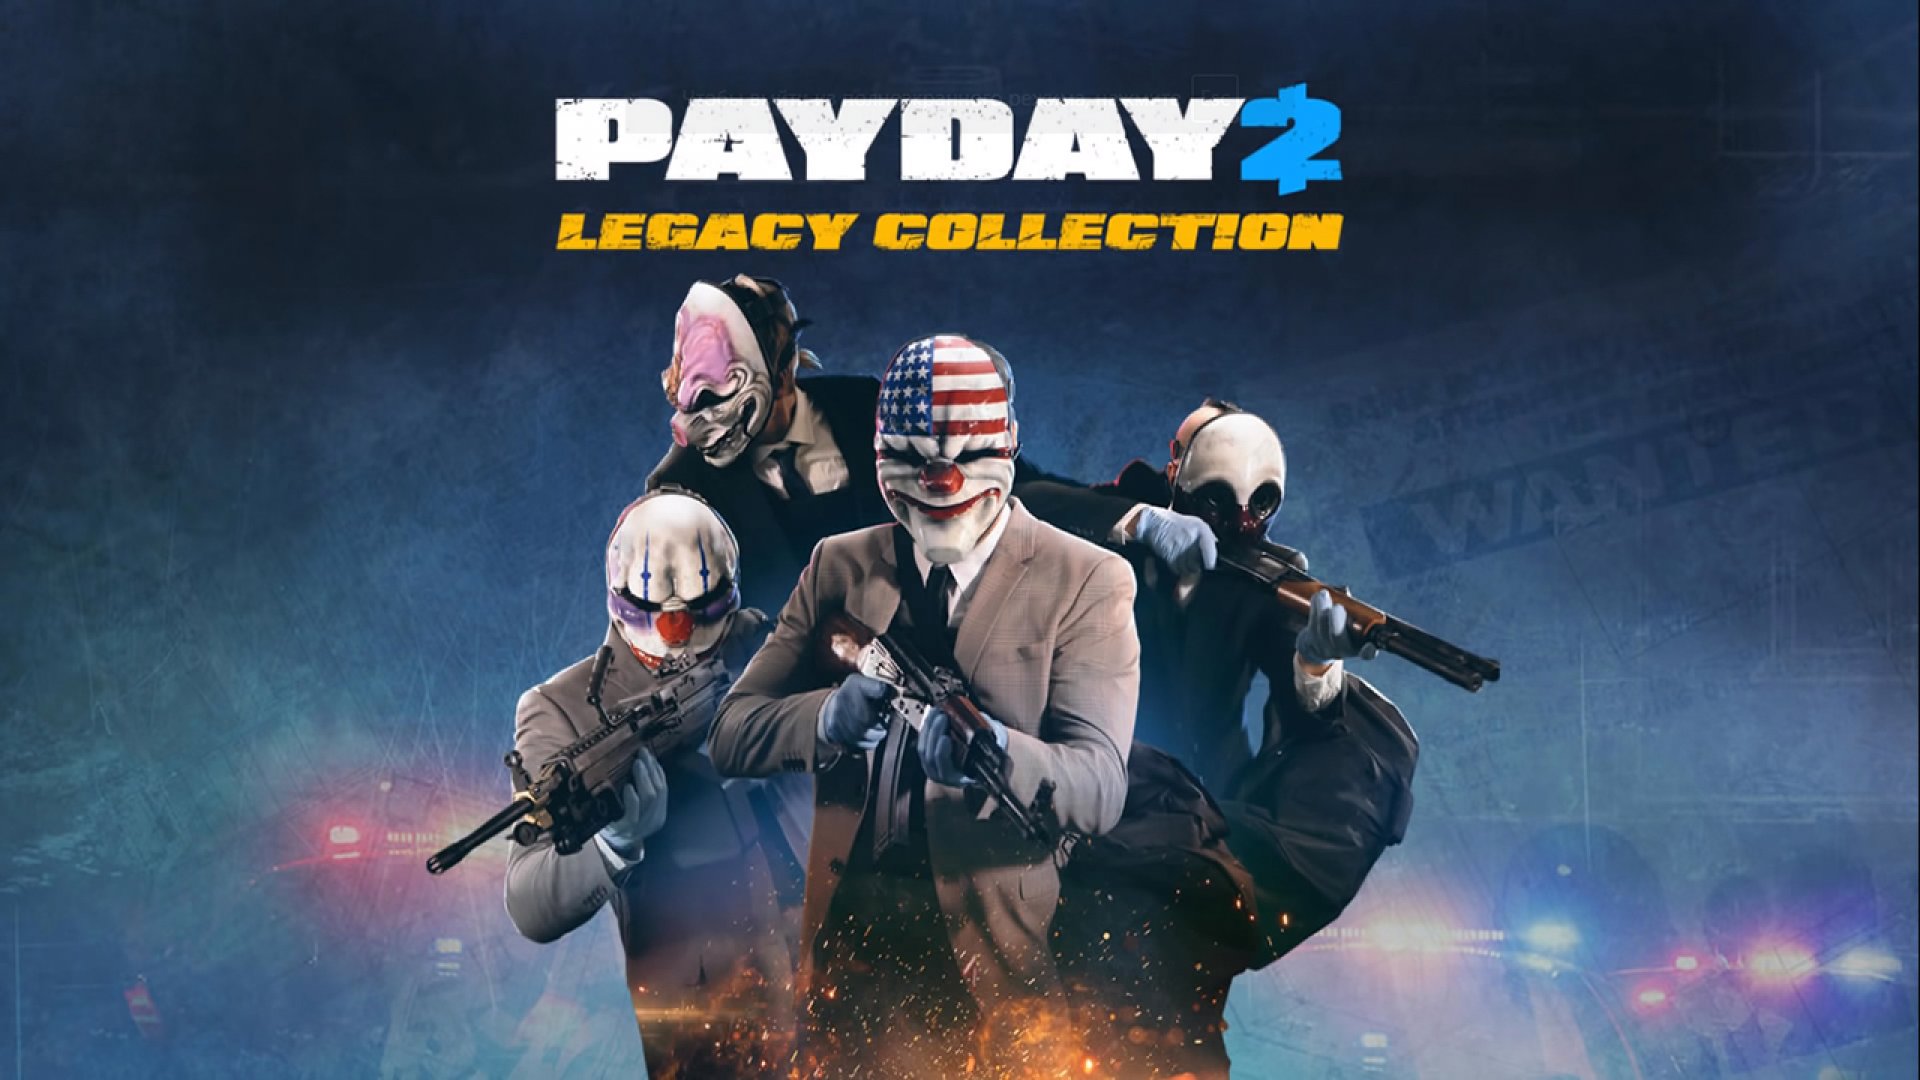 Cook faster для payday 2 фото 91